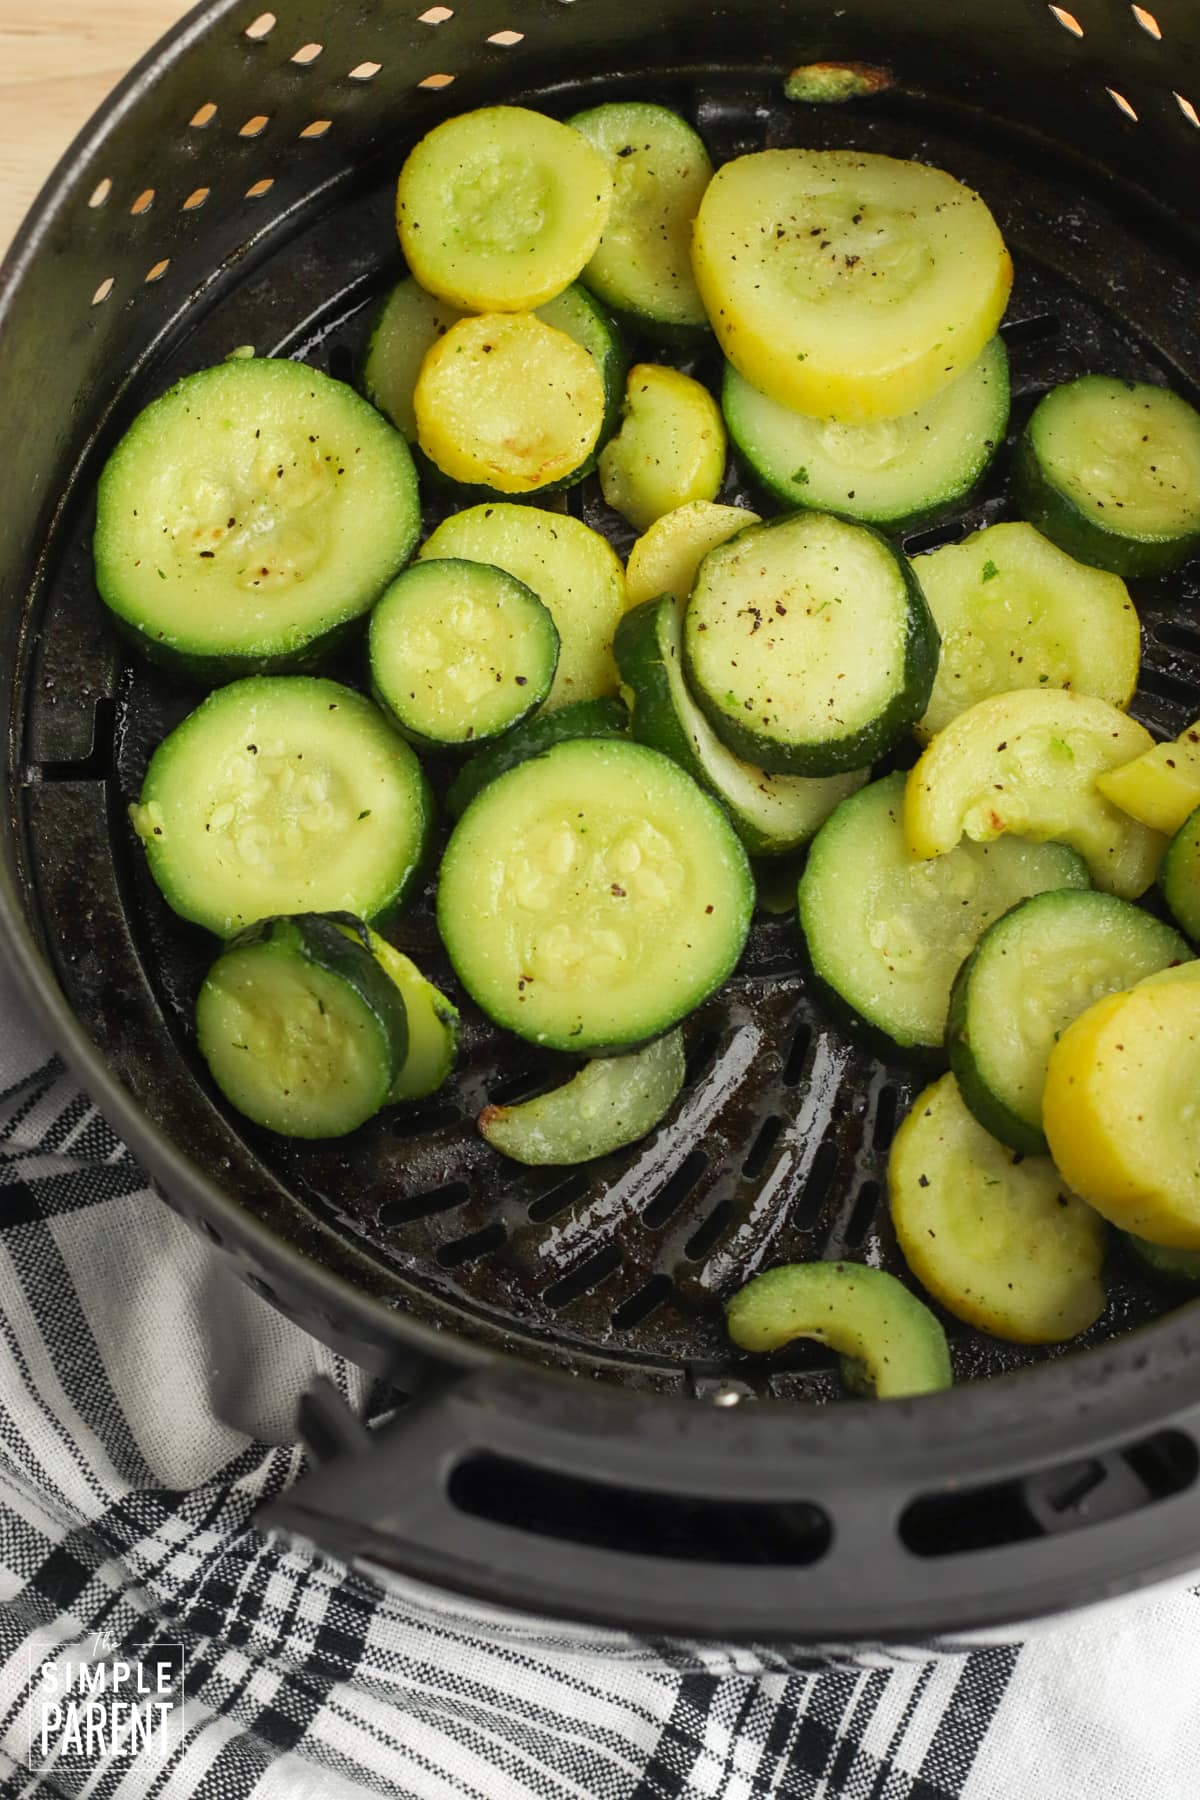 Pumpkin and zucchini slices in the air fryer basket